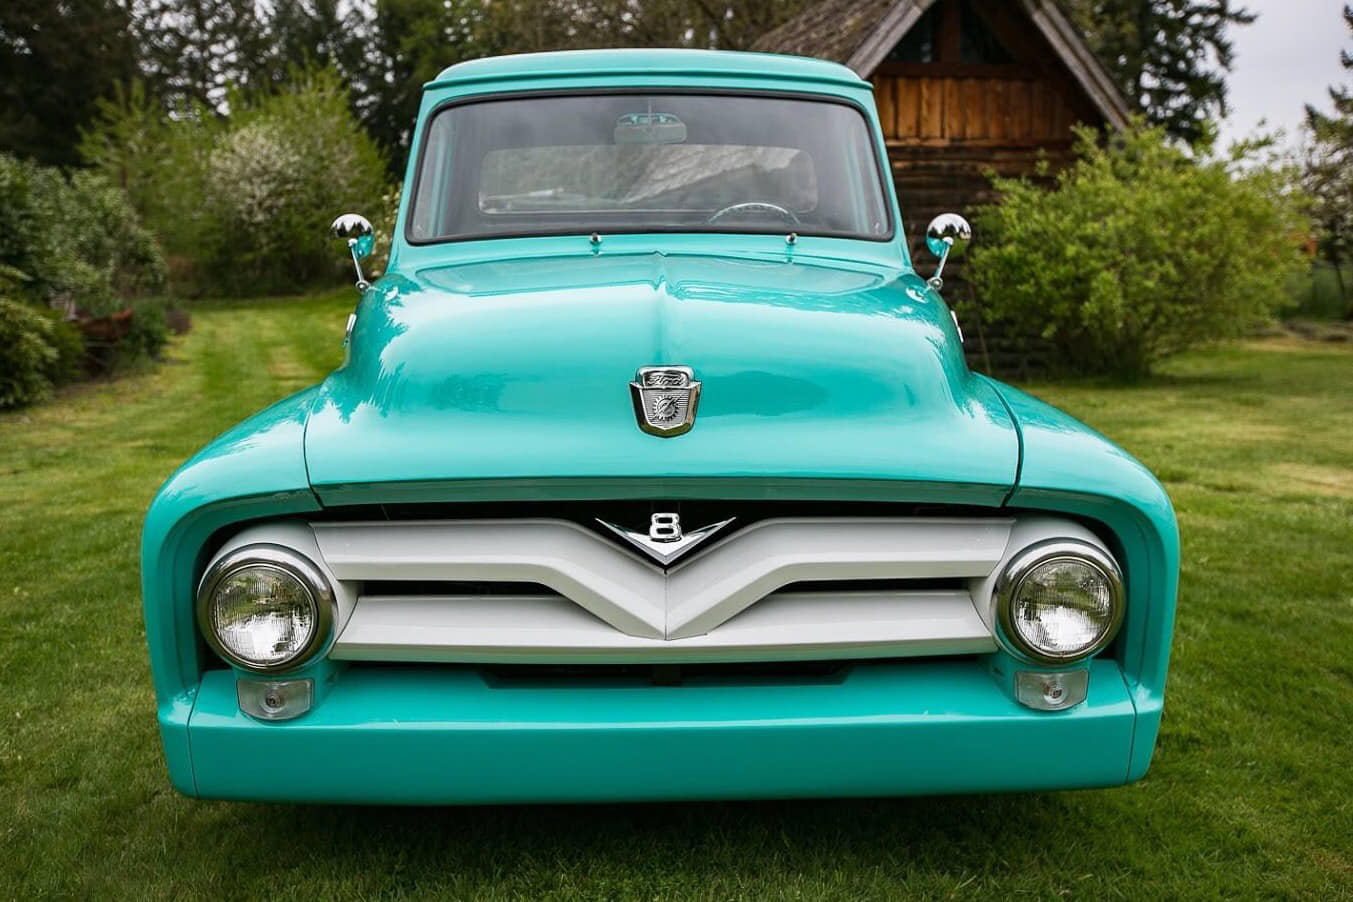 1955 Ford F100 Pickup With Ford 302 Engine 7.jpg